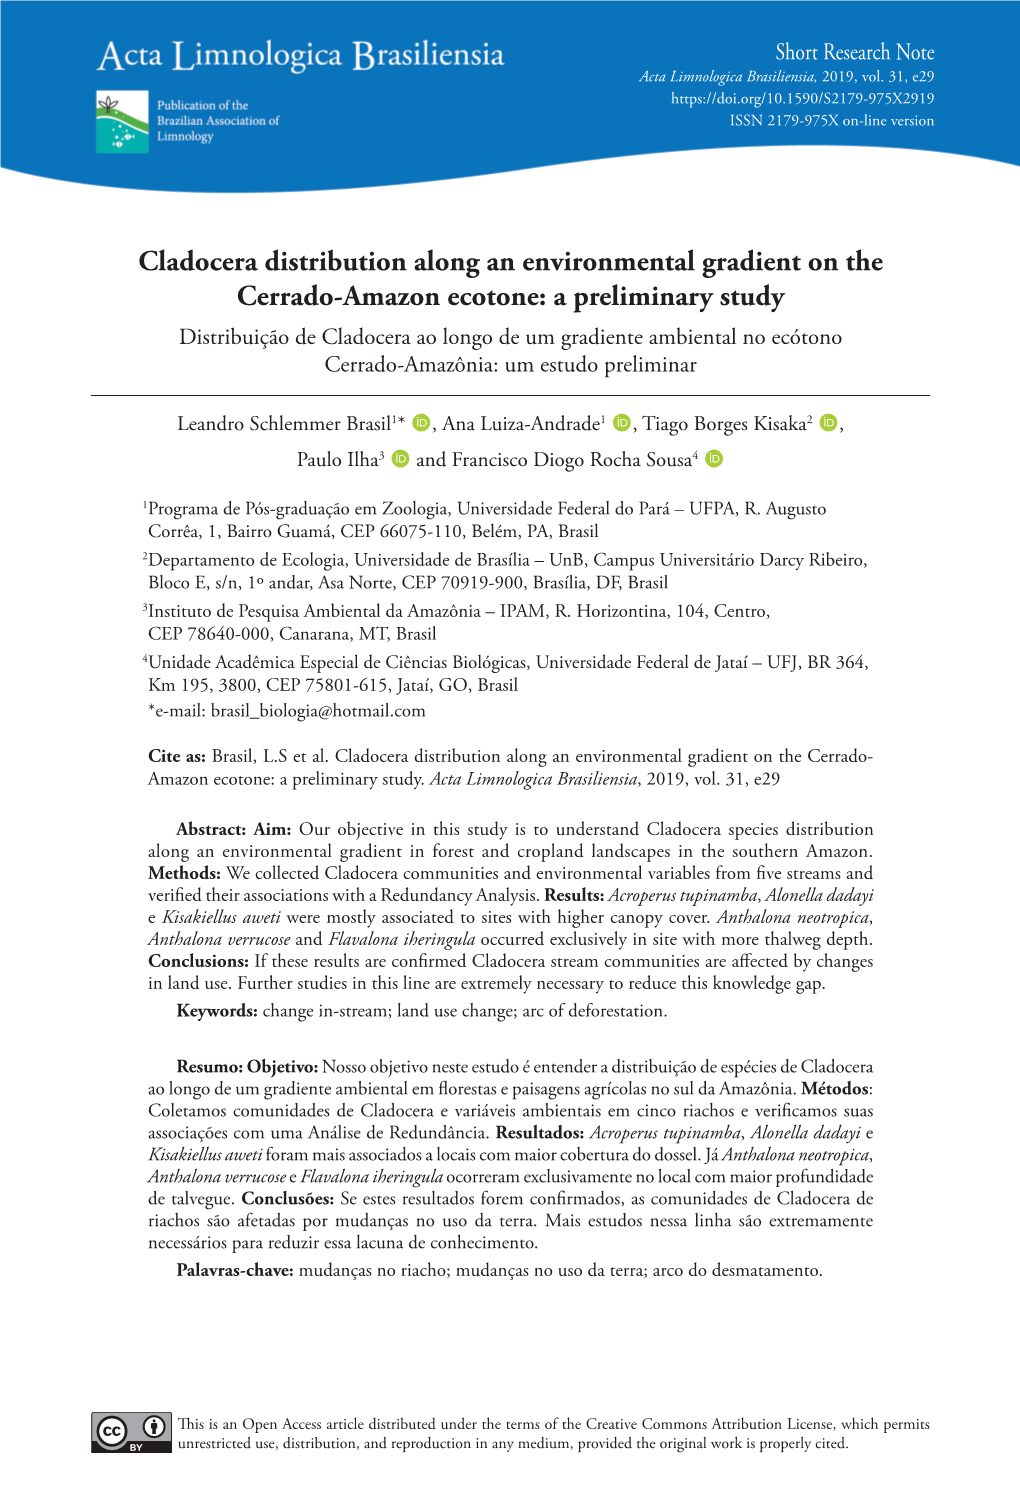 Cladocera Distribution Along an Environmental Gradient on The